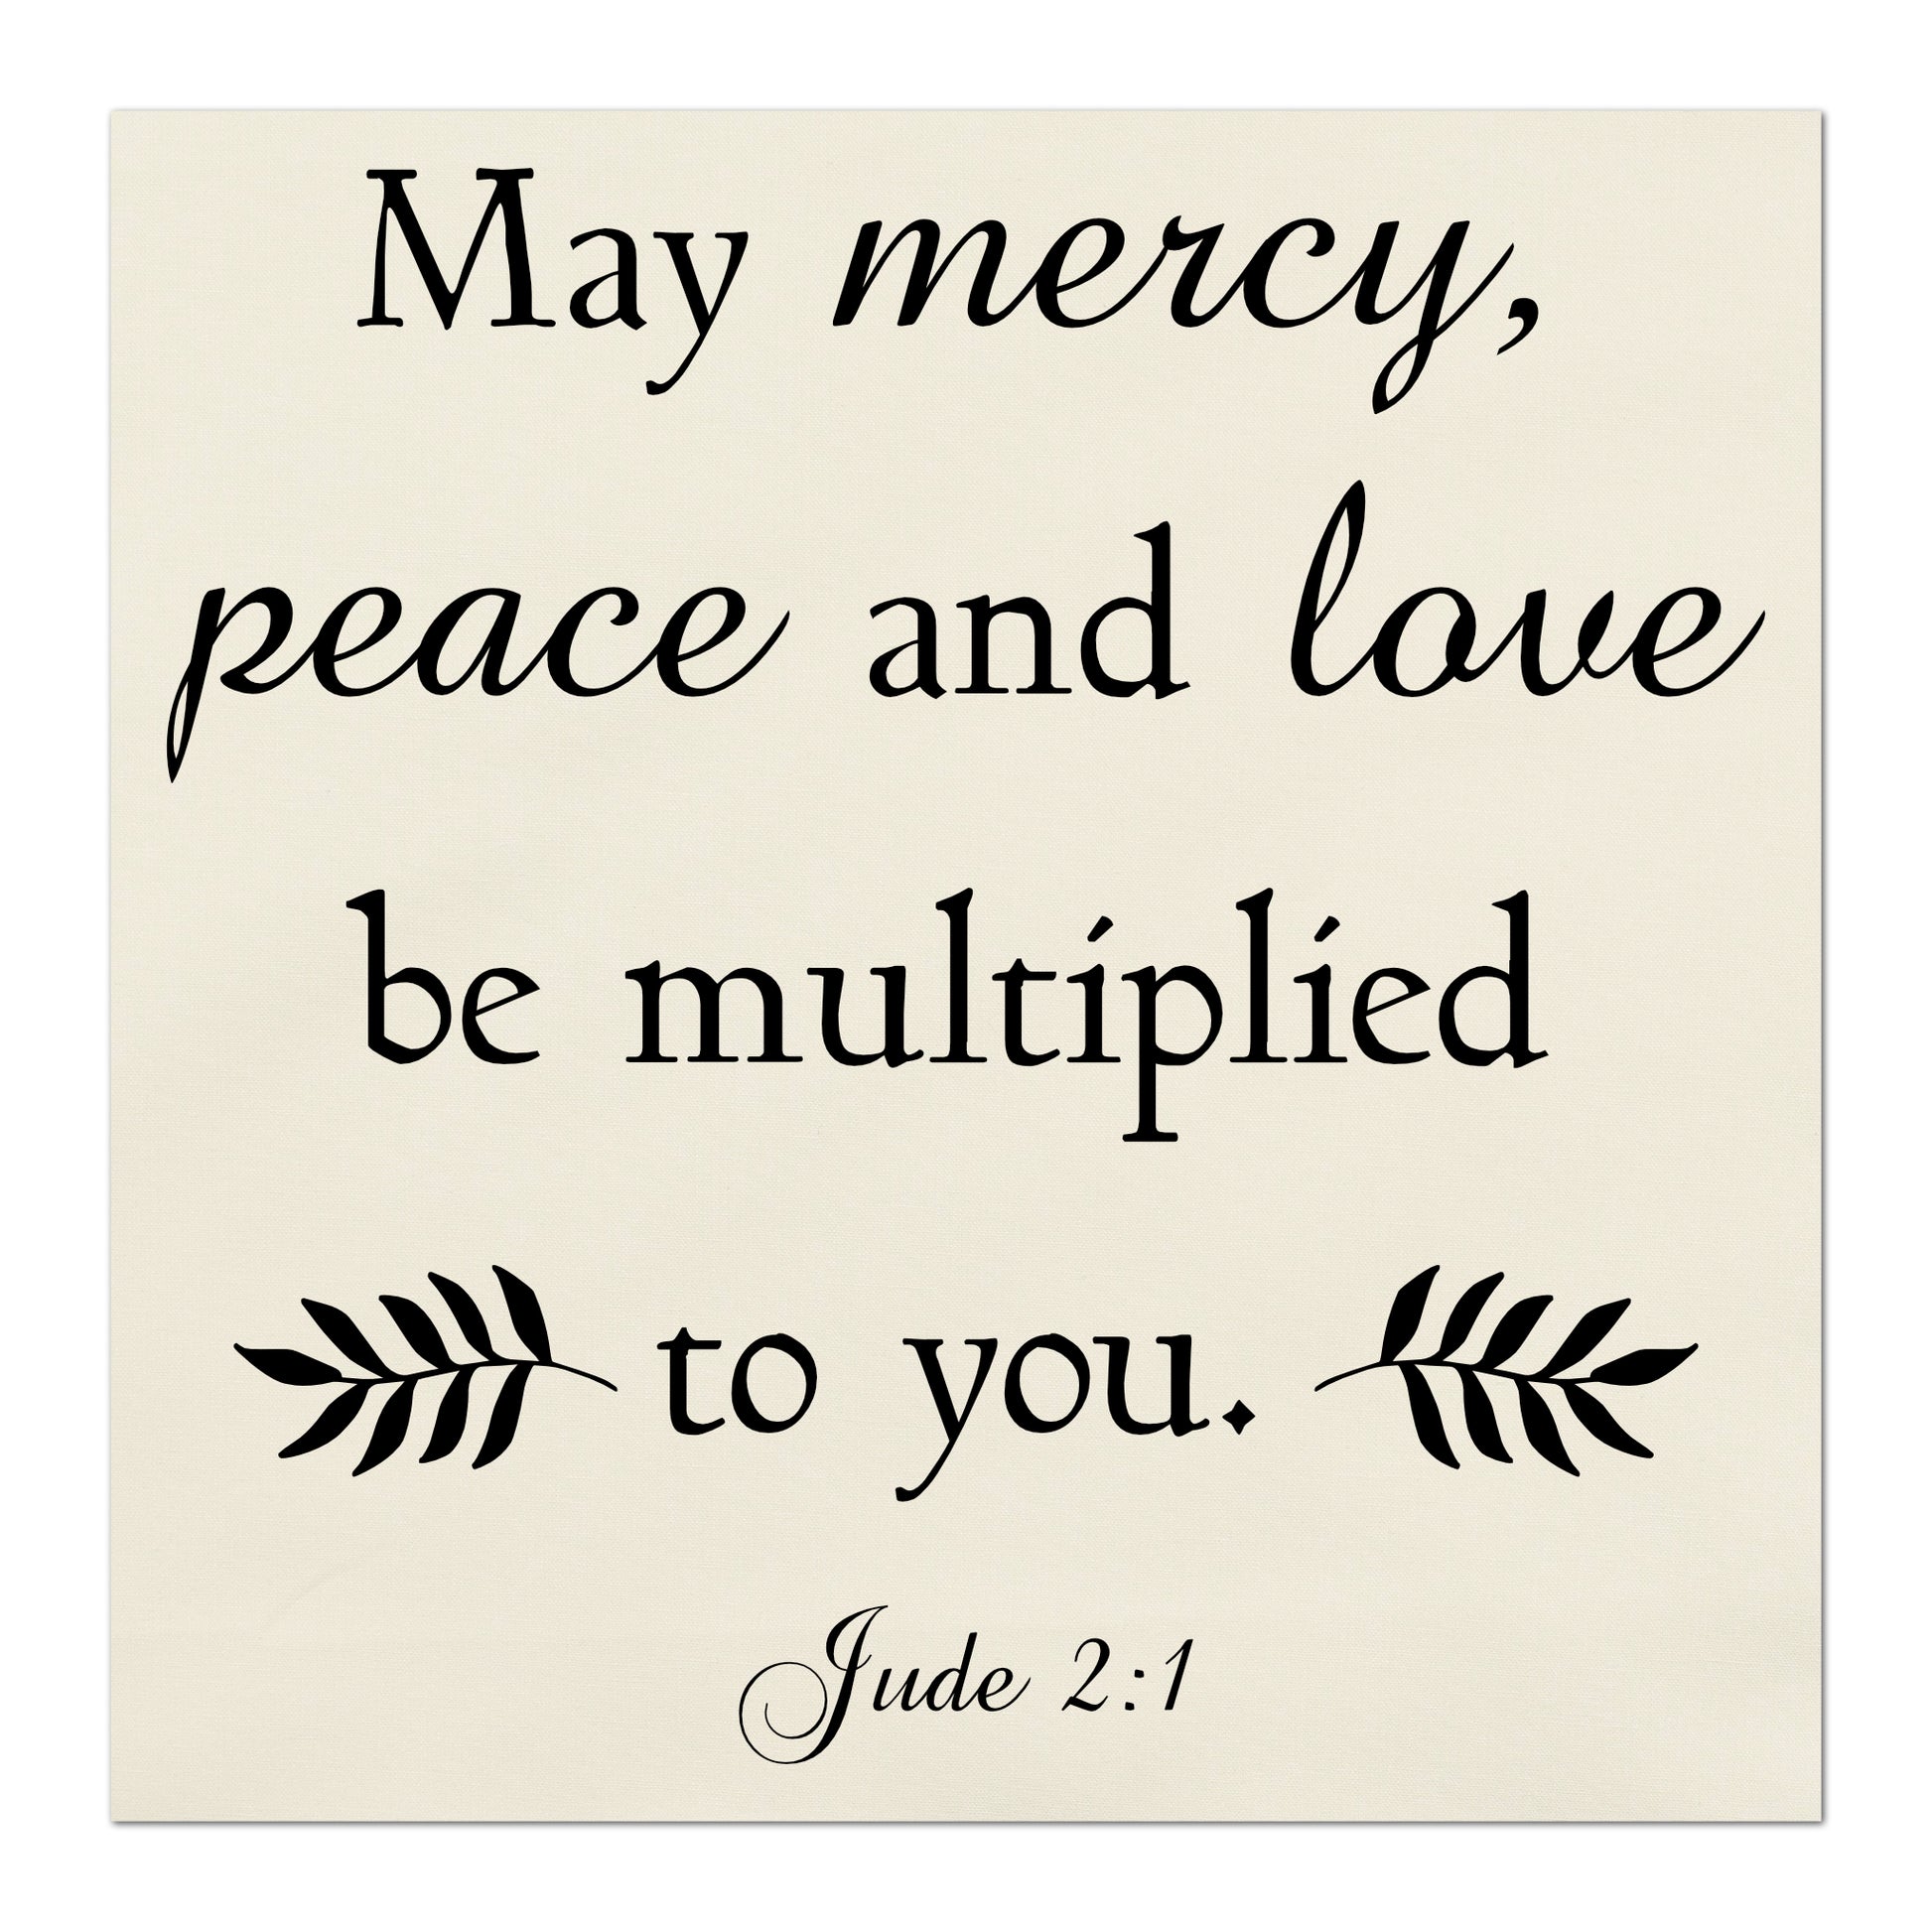 May mercy, peace and love be multiplied to you.  Jude 2:1 - Religious Fabric, Christian Scripture, Large Quilt Block